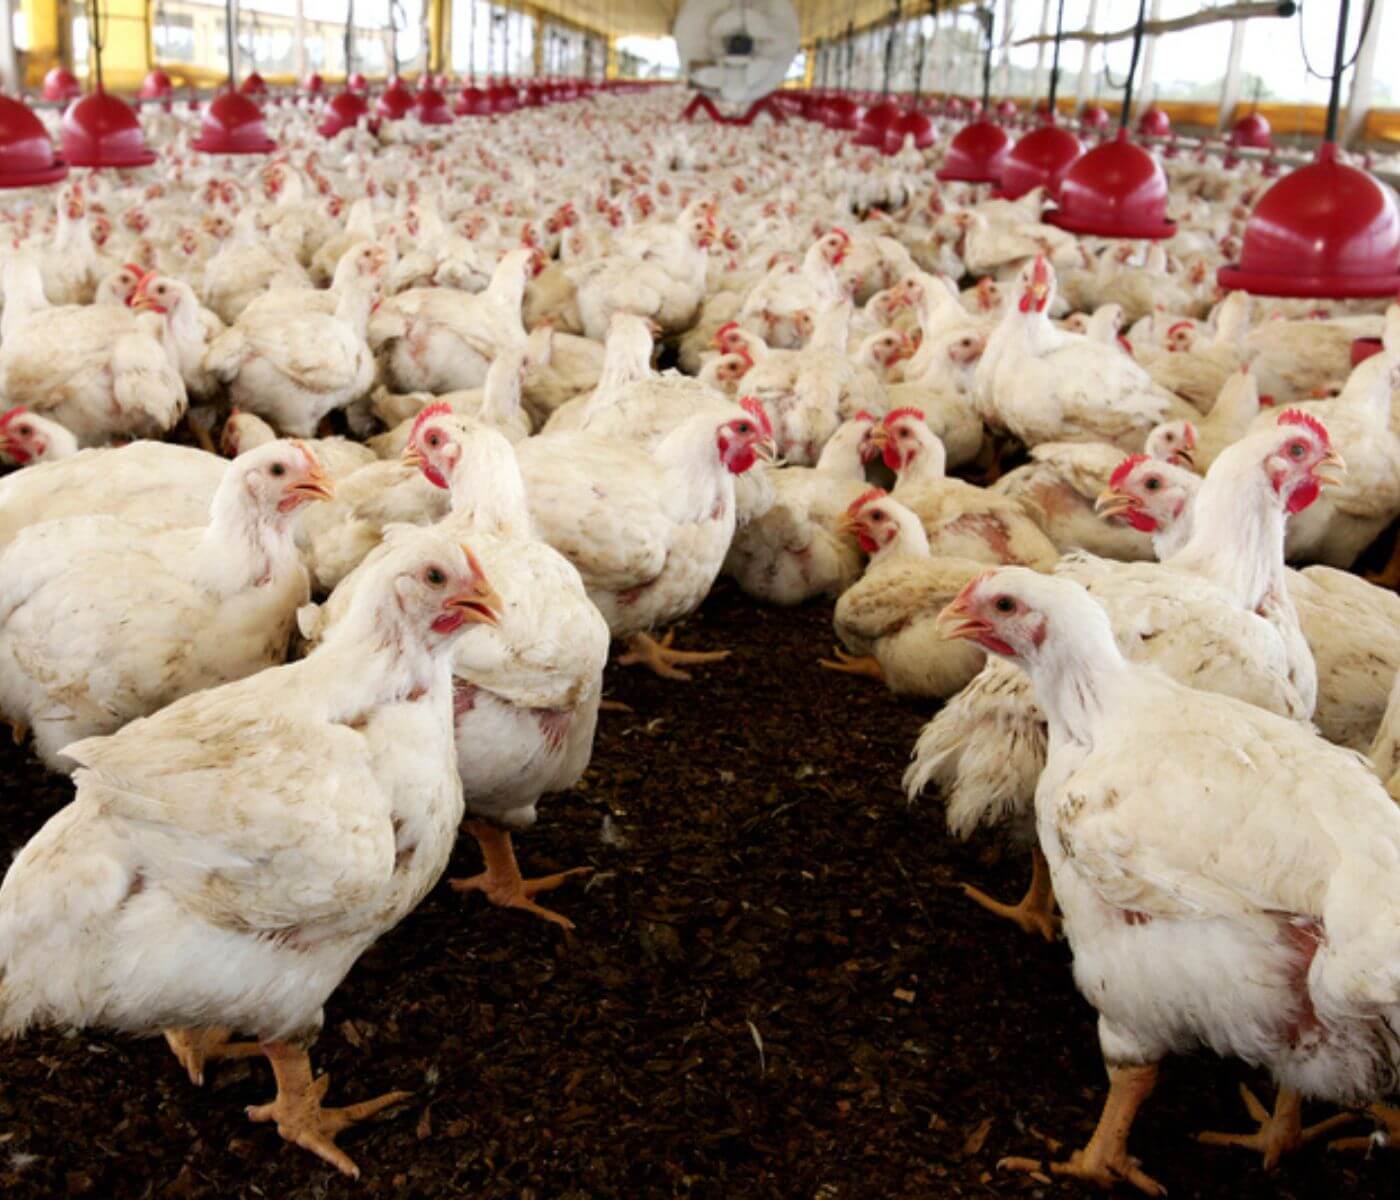 Namibia bans the import of poultry products from Chile and Argentina